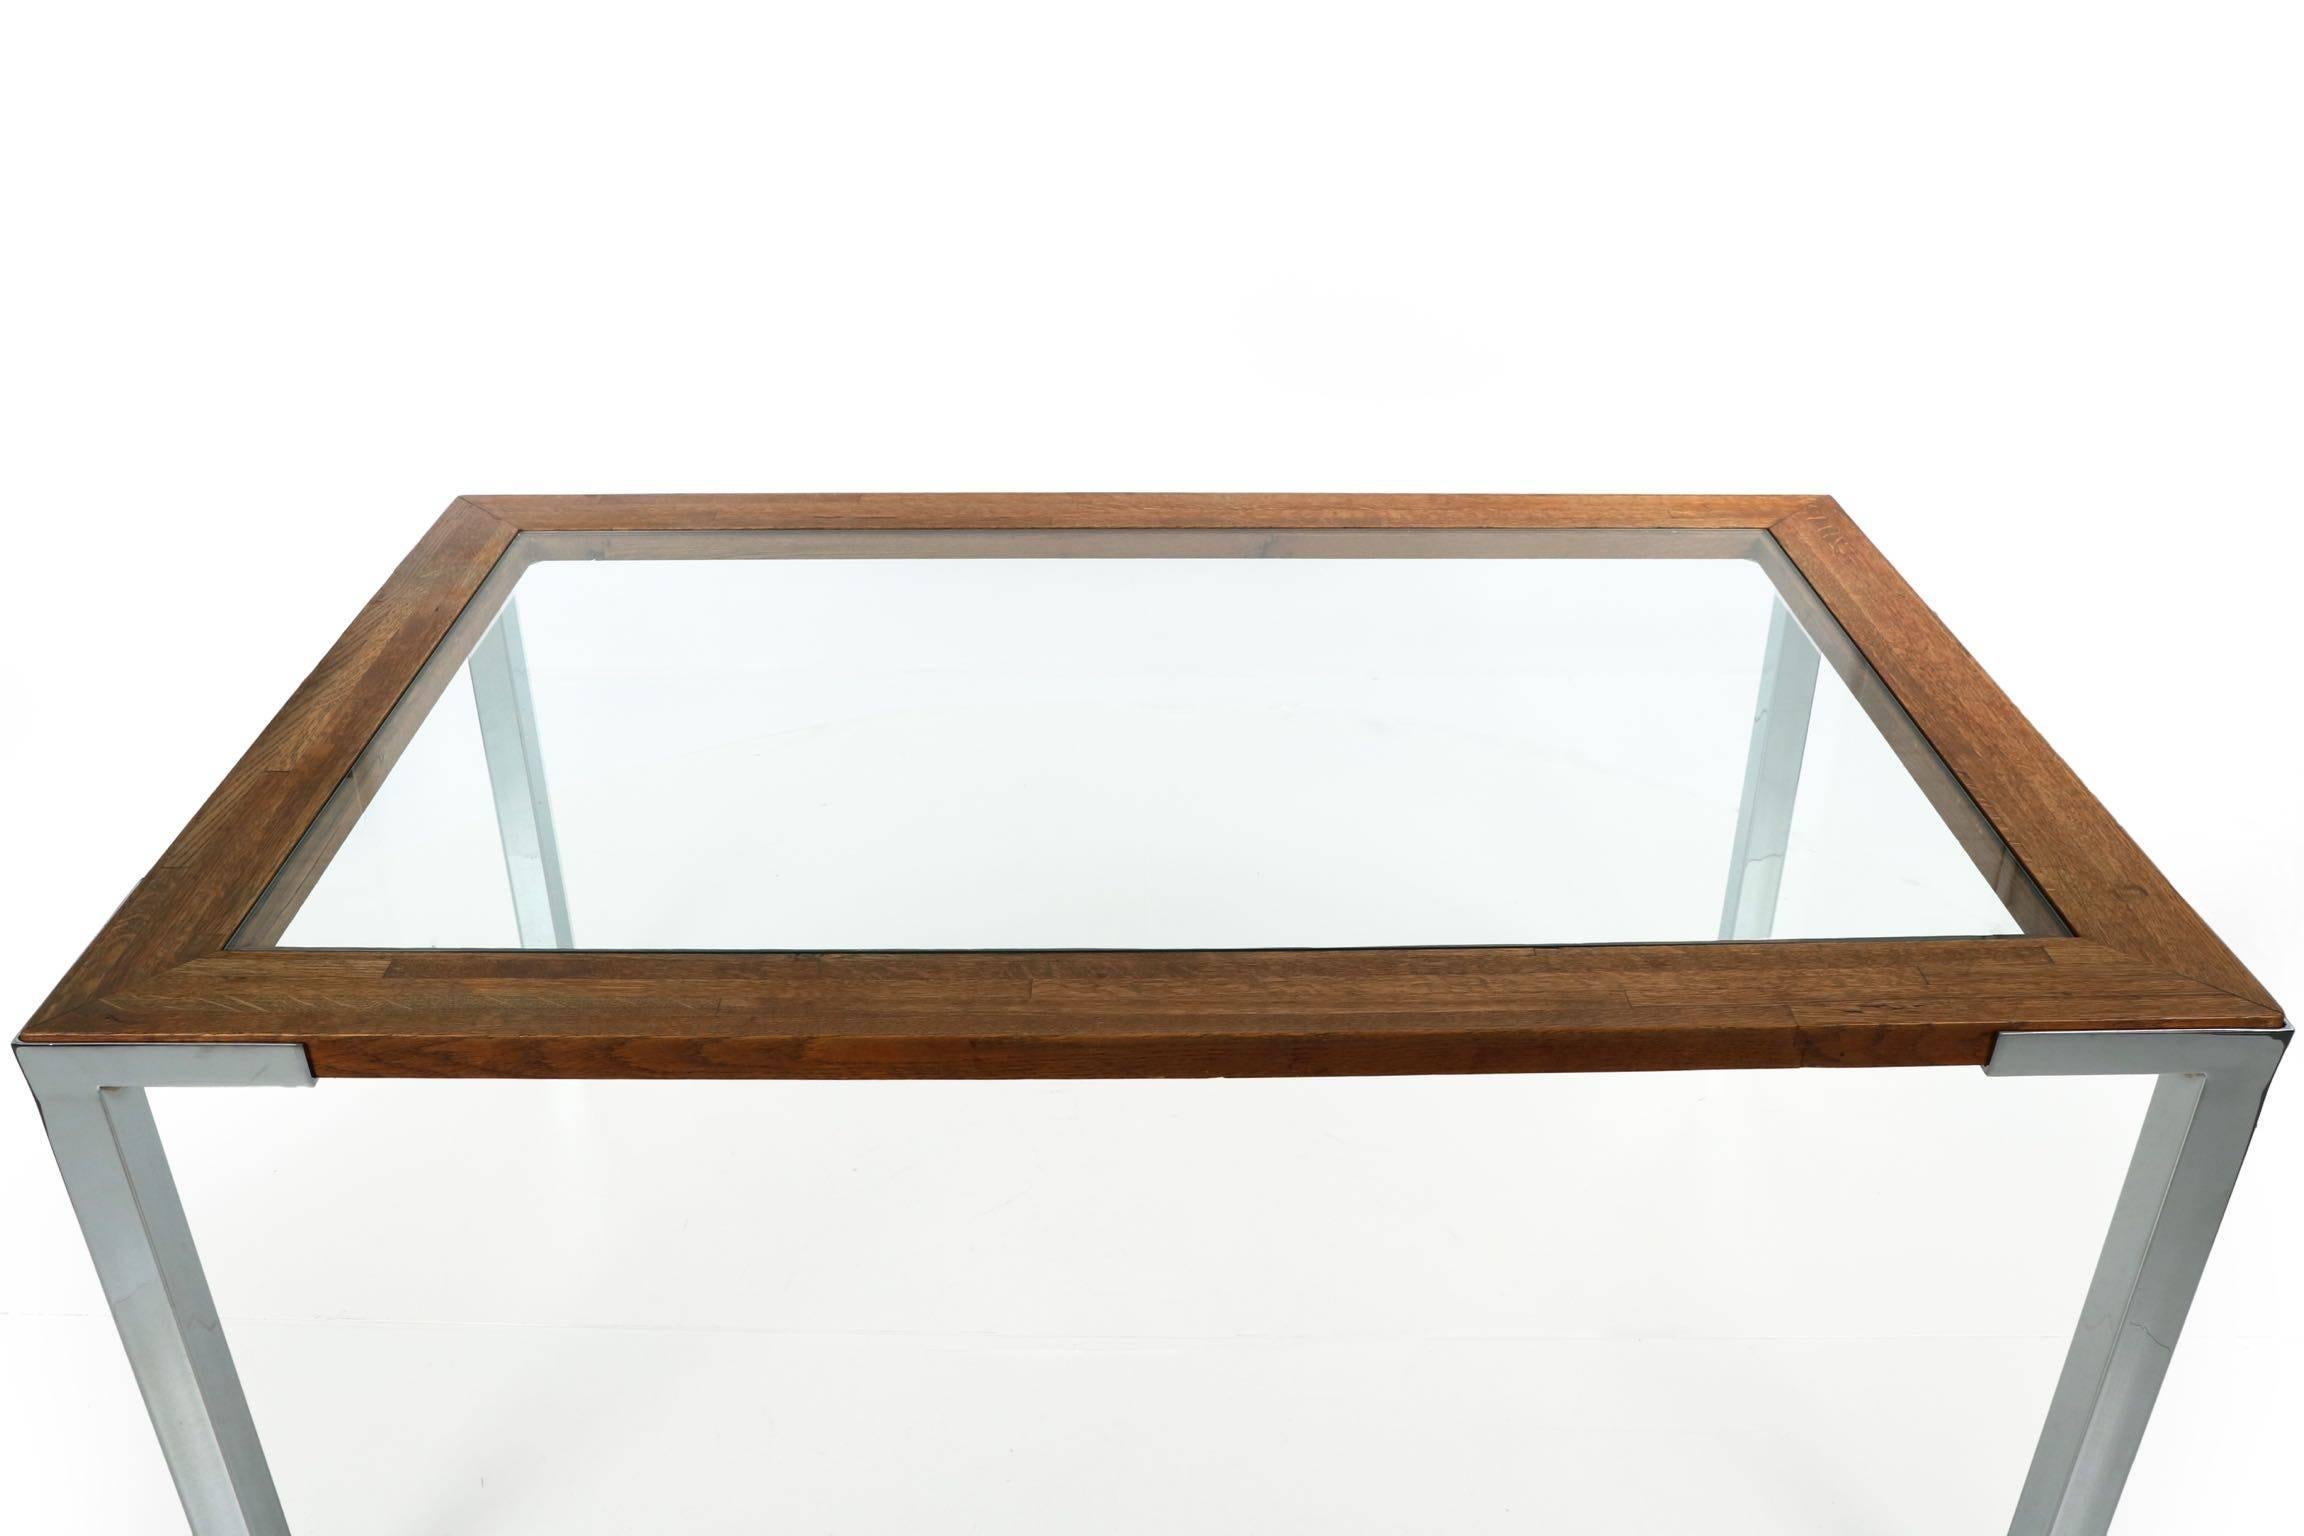 Minimalist Modern Chrome, Glass and Dovetail Joined Oak Dining Table c. 1980's